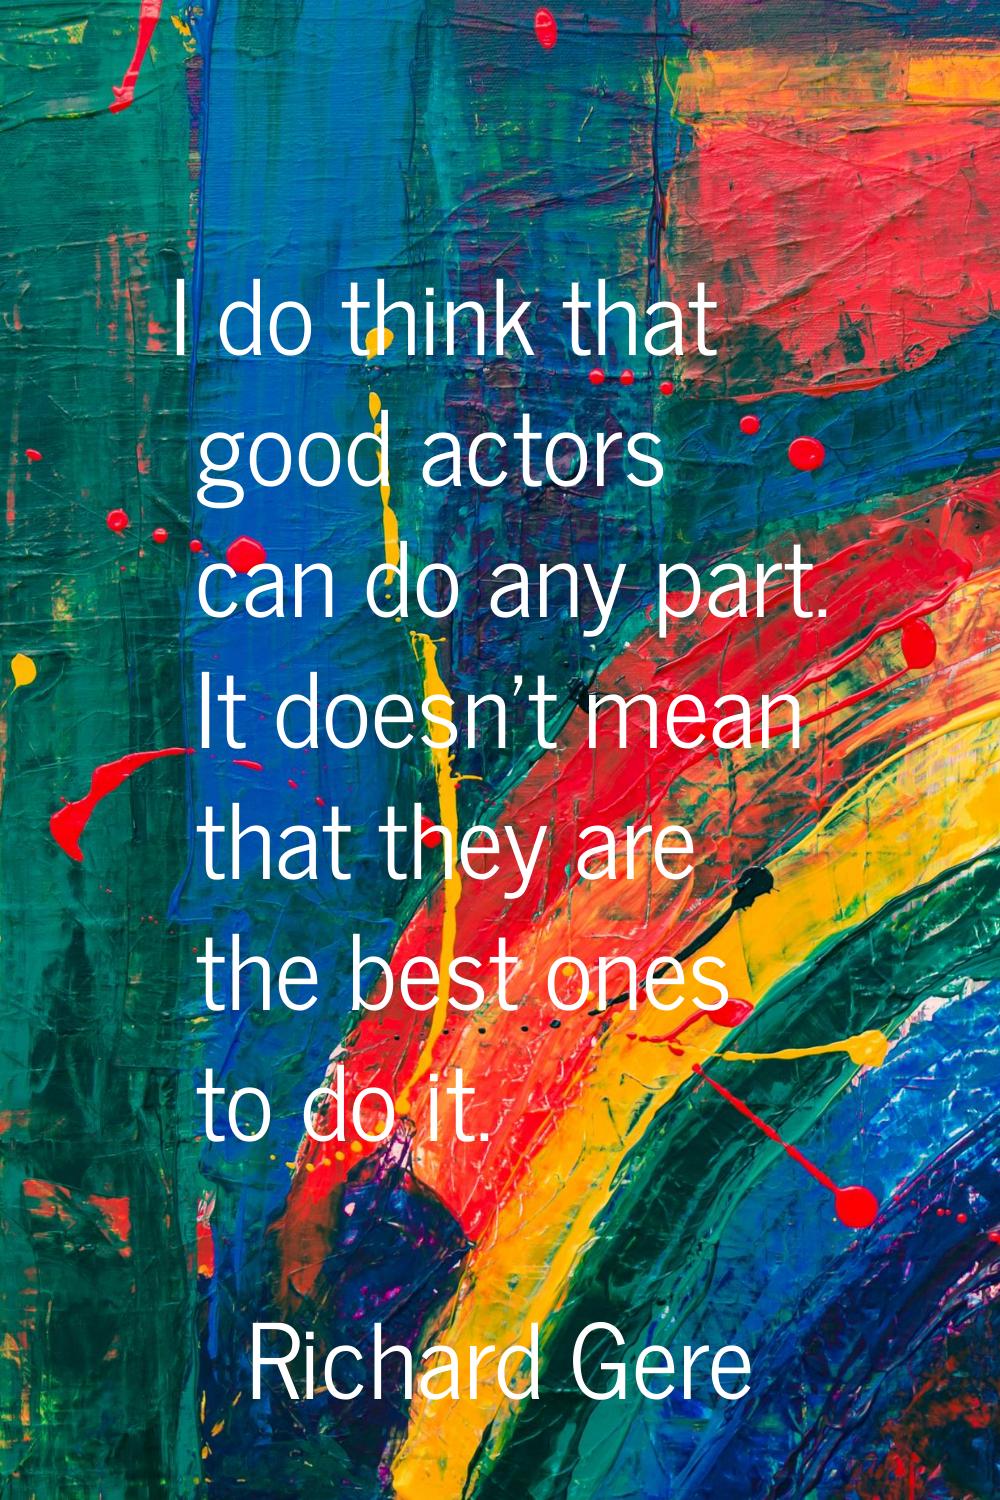 I do think that good actors can do any part. It doesn't mean that they are the best ones to do it.